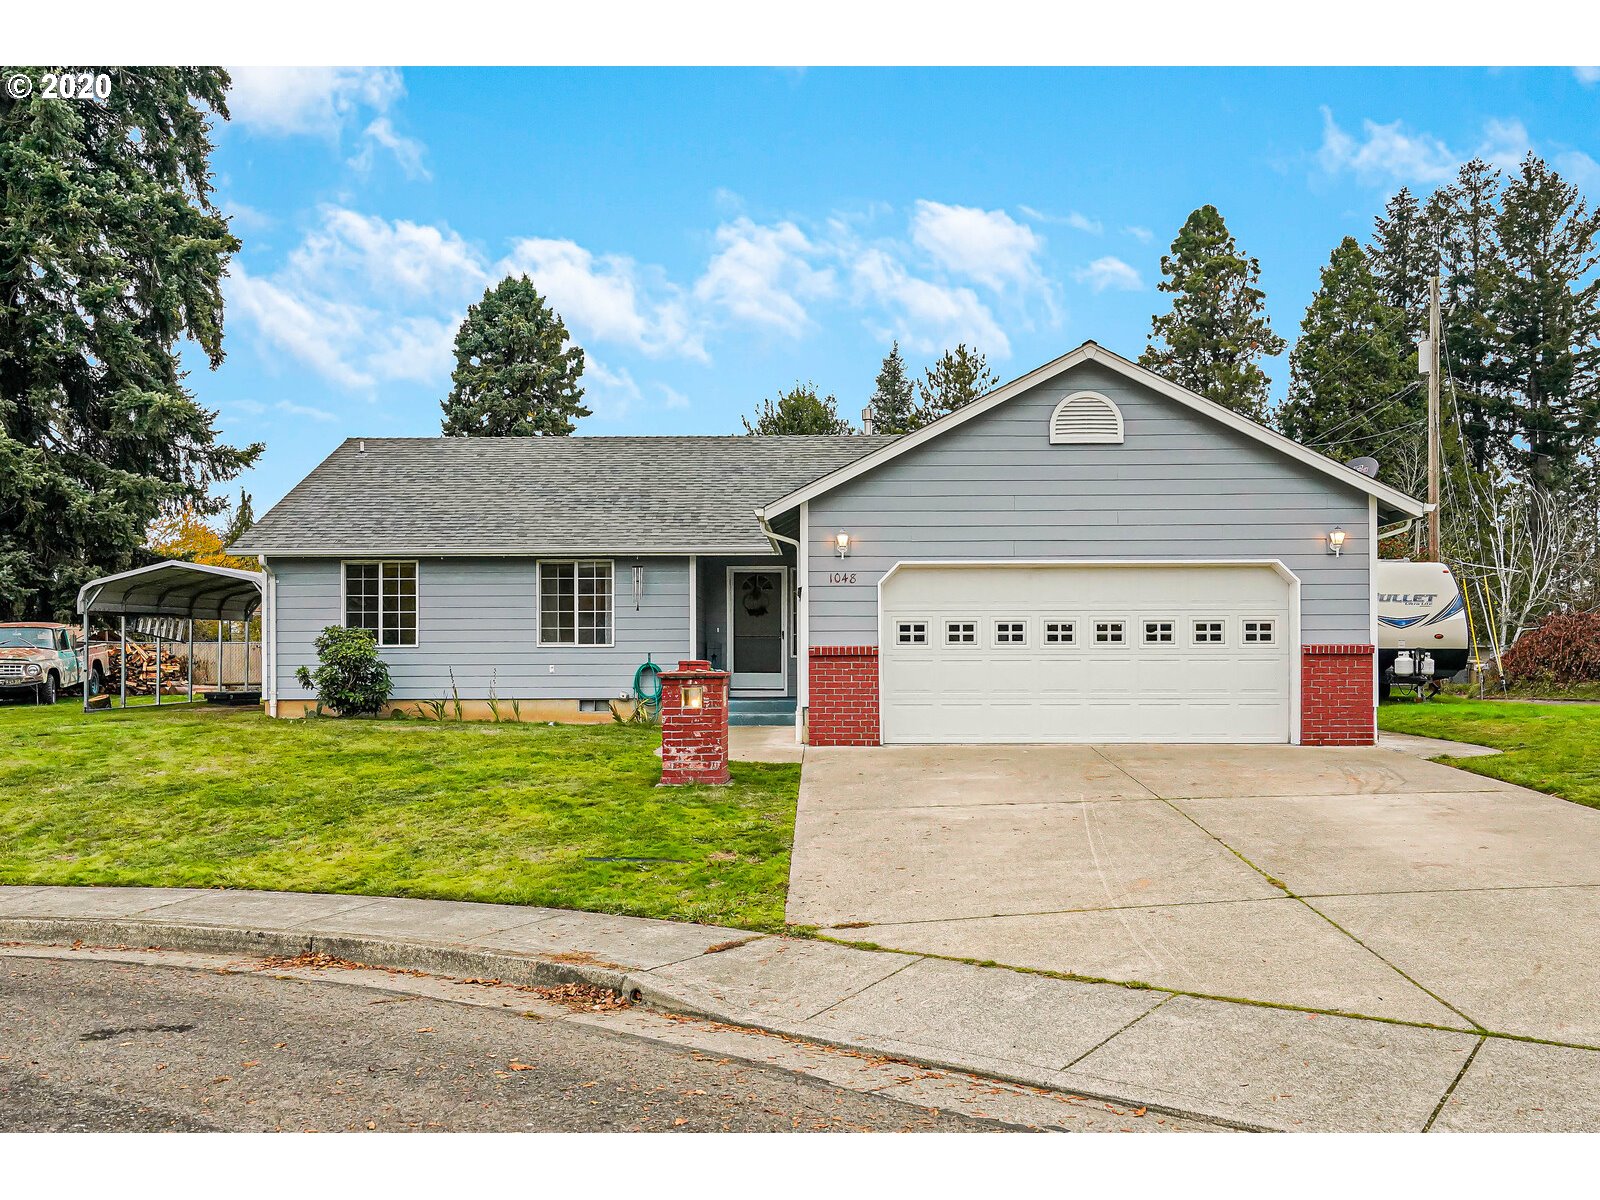 1048 26TH CT (1 of 32)